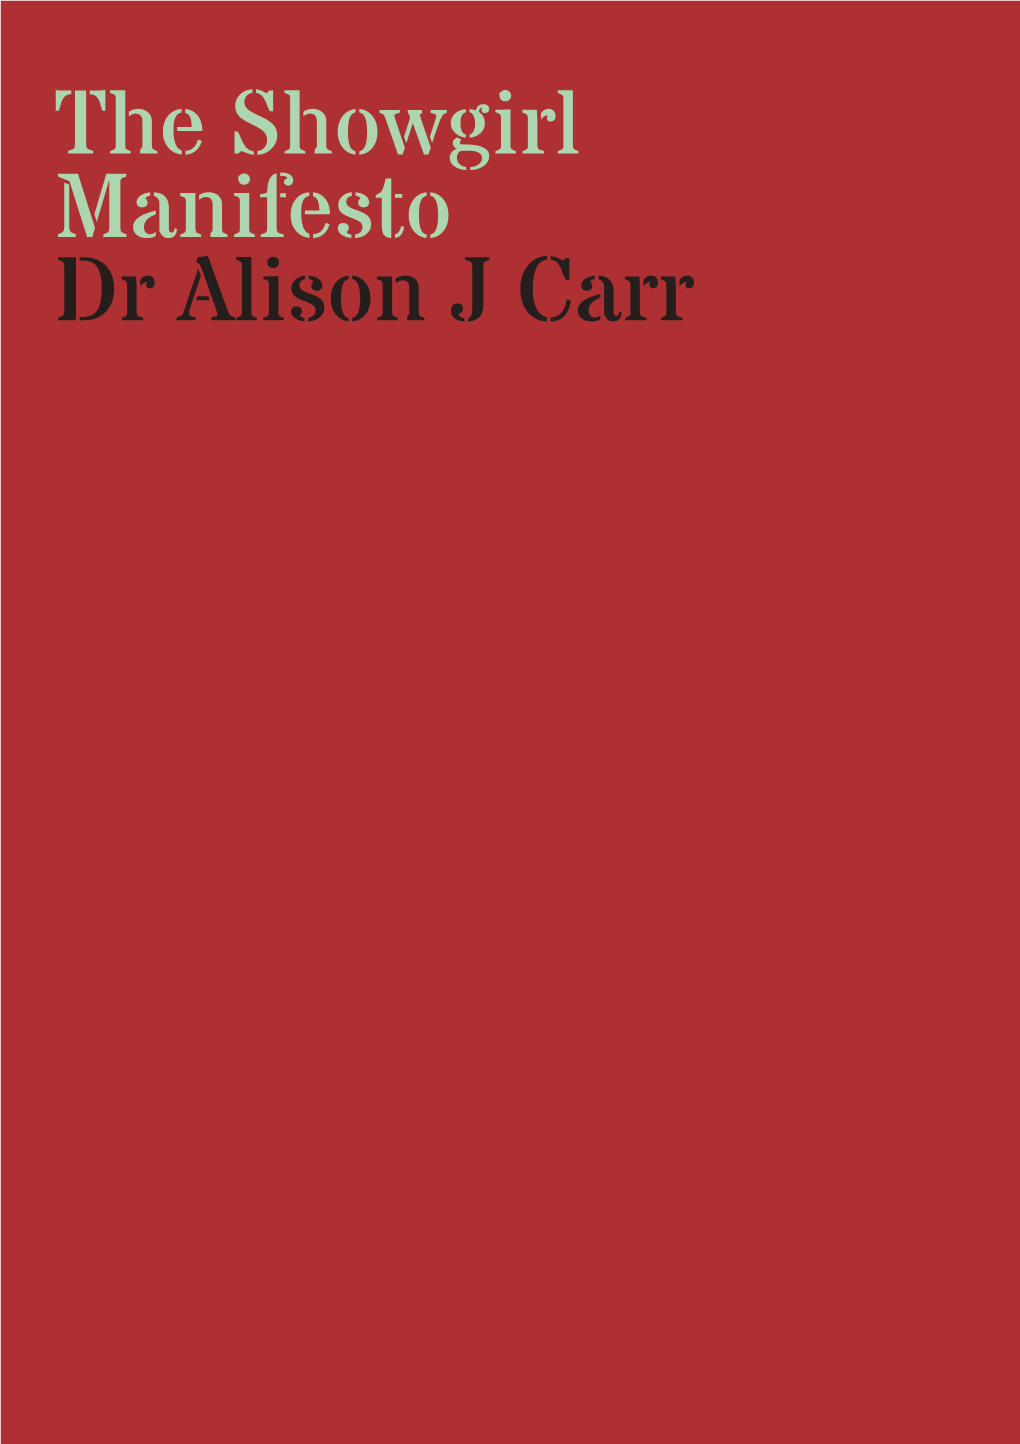 The Showgirl Manifesto Dr Alison J Carr the Showgirl Manifesto Dr Alison J Carr Project Description